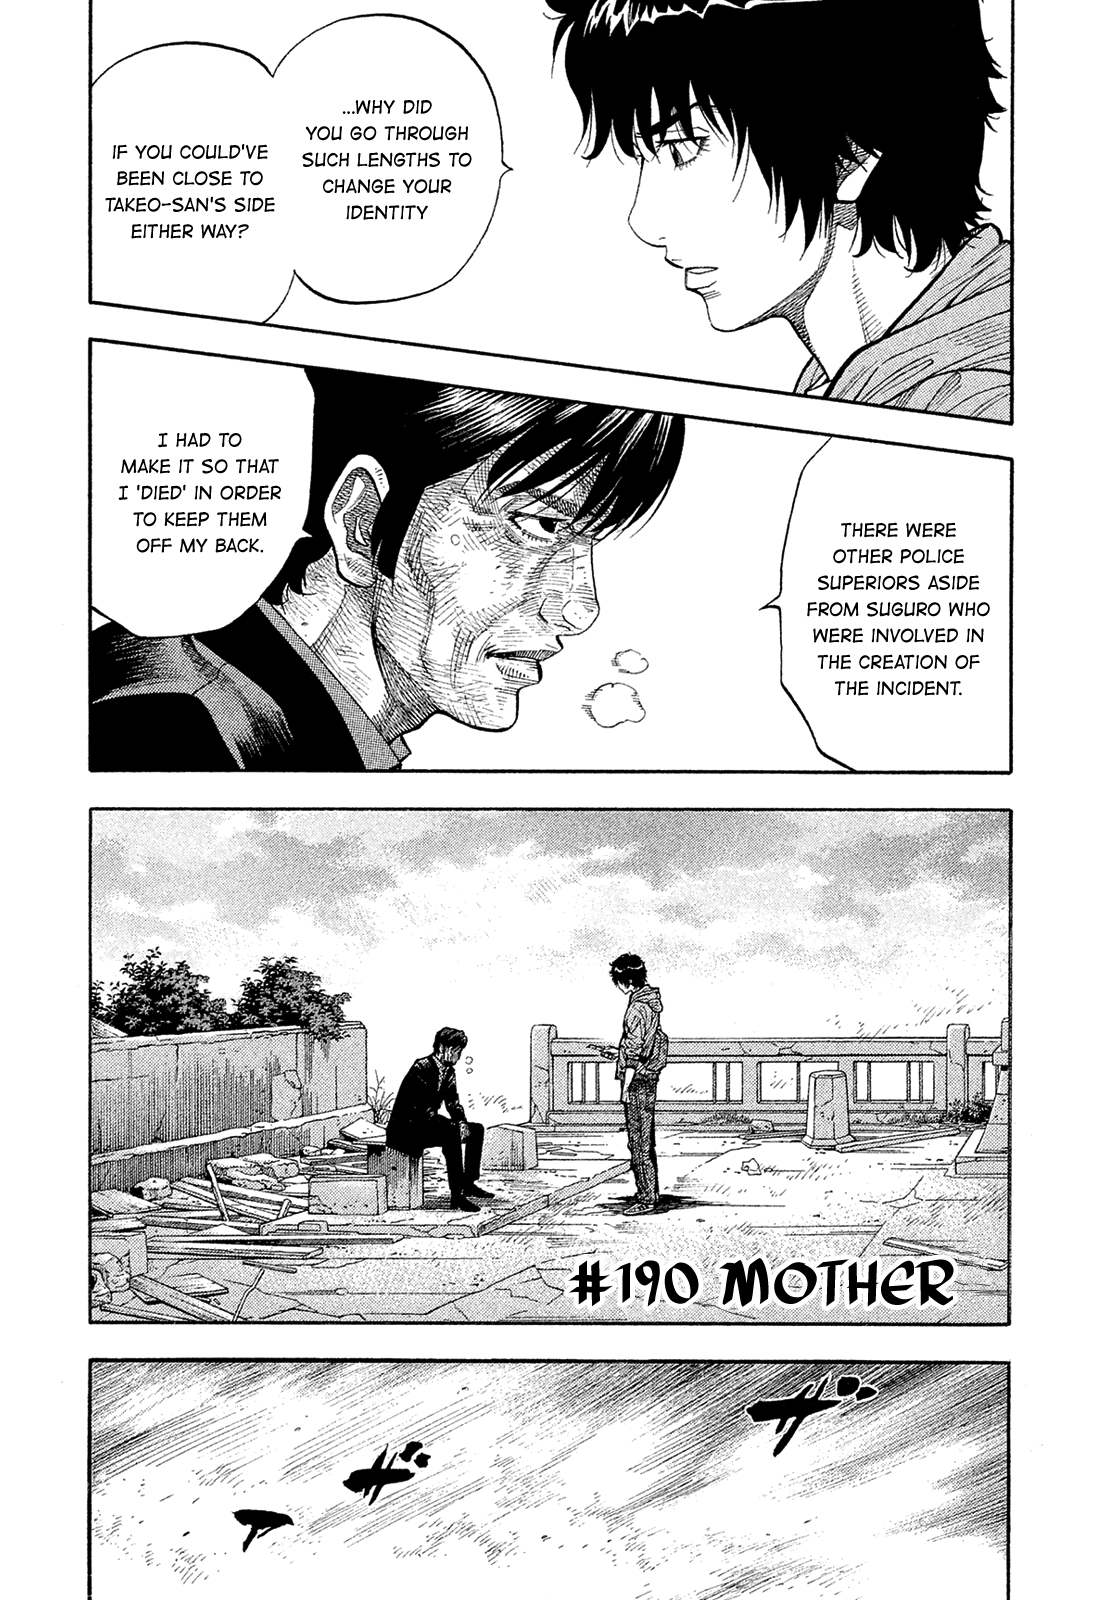 Montage (Watanabe Jun) Chapter 190: Mother - Picture 2